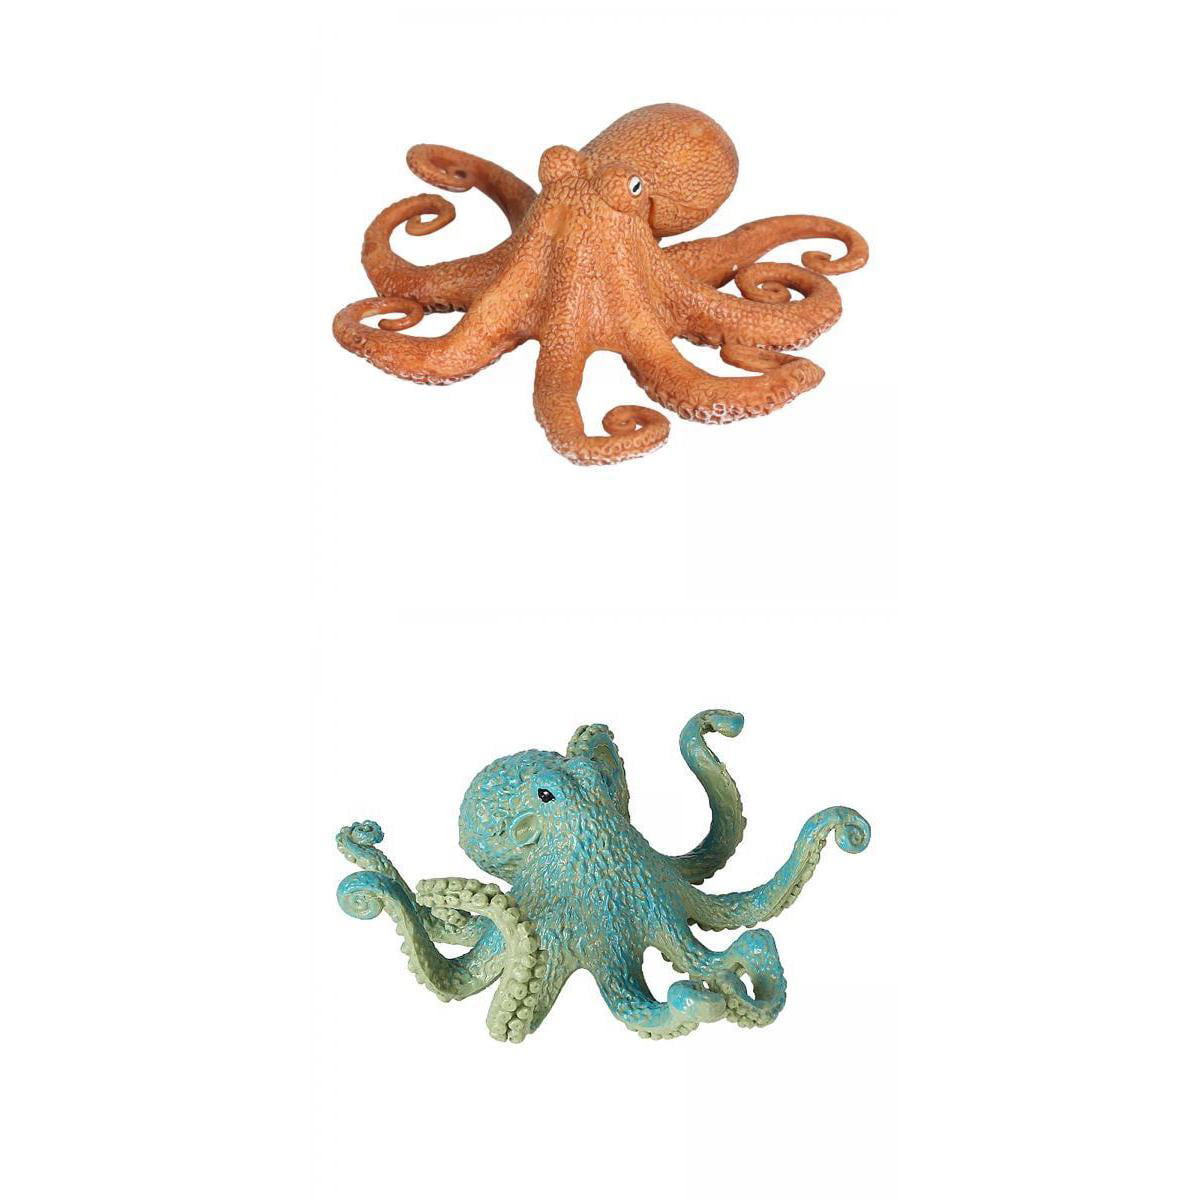 Spring Toy Octopus Kids Bound Multi Color Painting Plastic Figurine Decor Gifts 